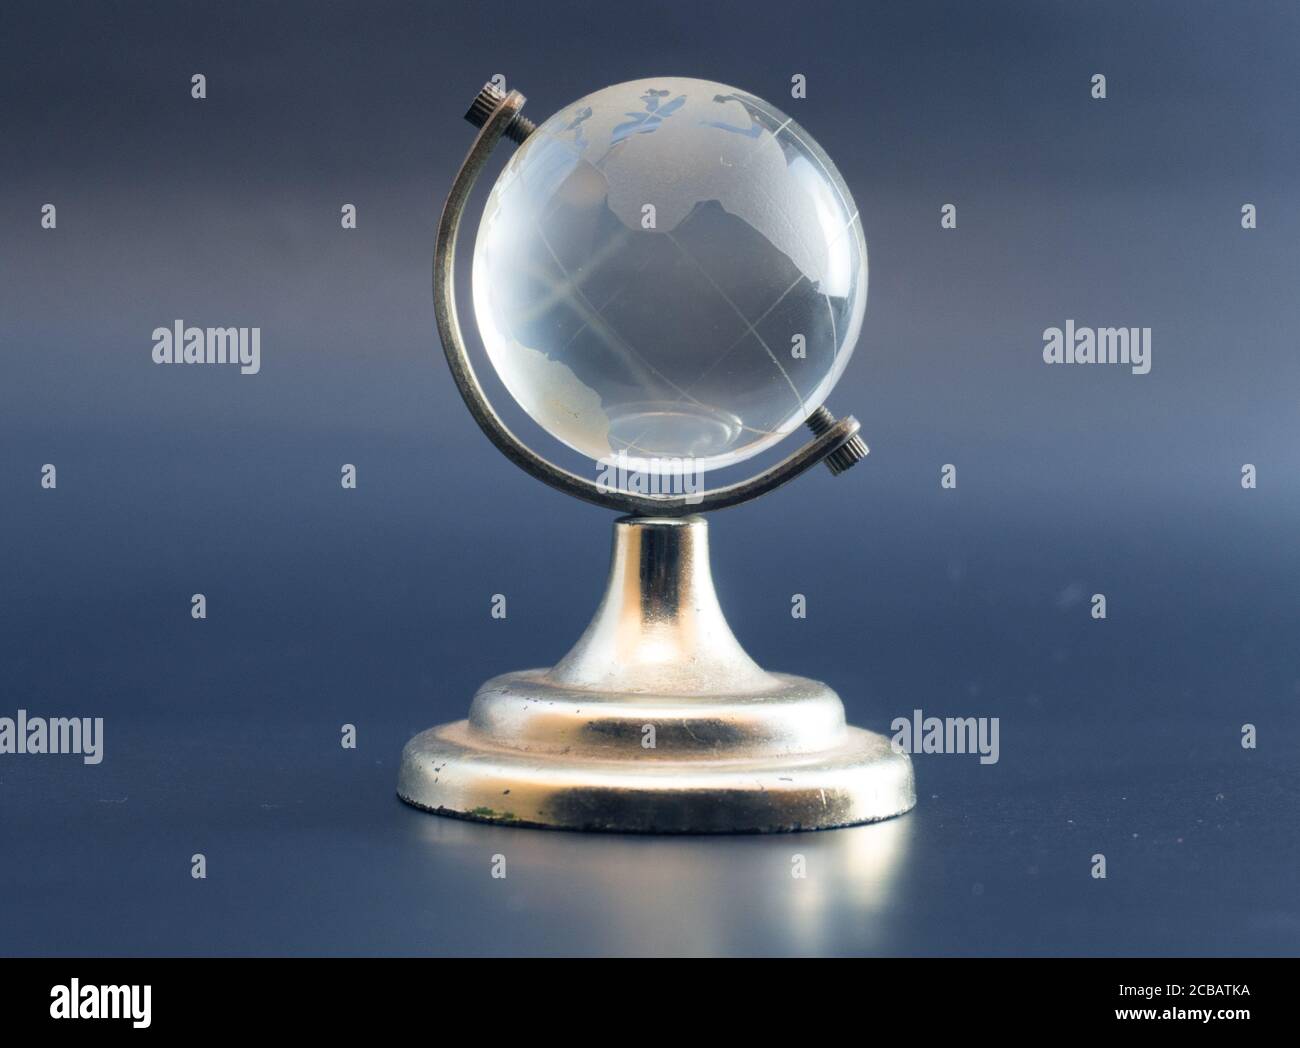 White crystal transparent Globe or globes isolated ball which standing on metal golden frame. Stock Photo